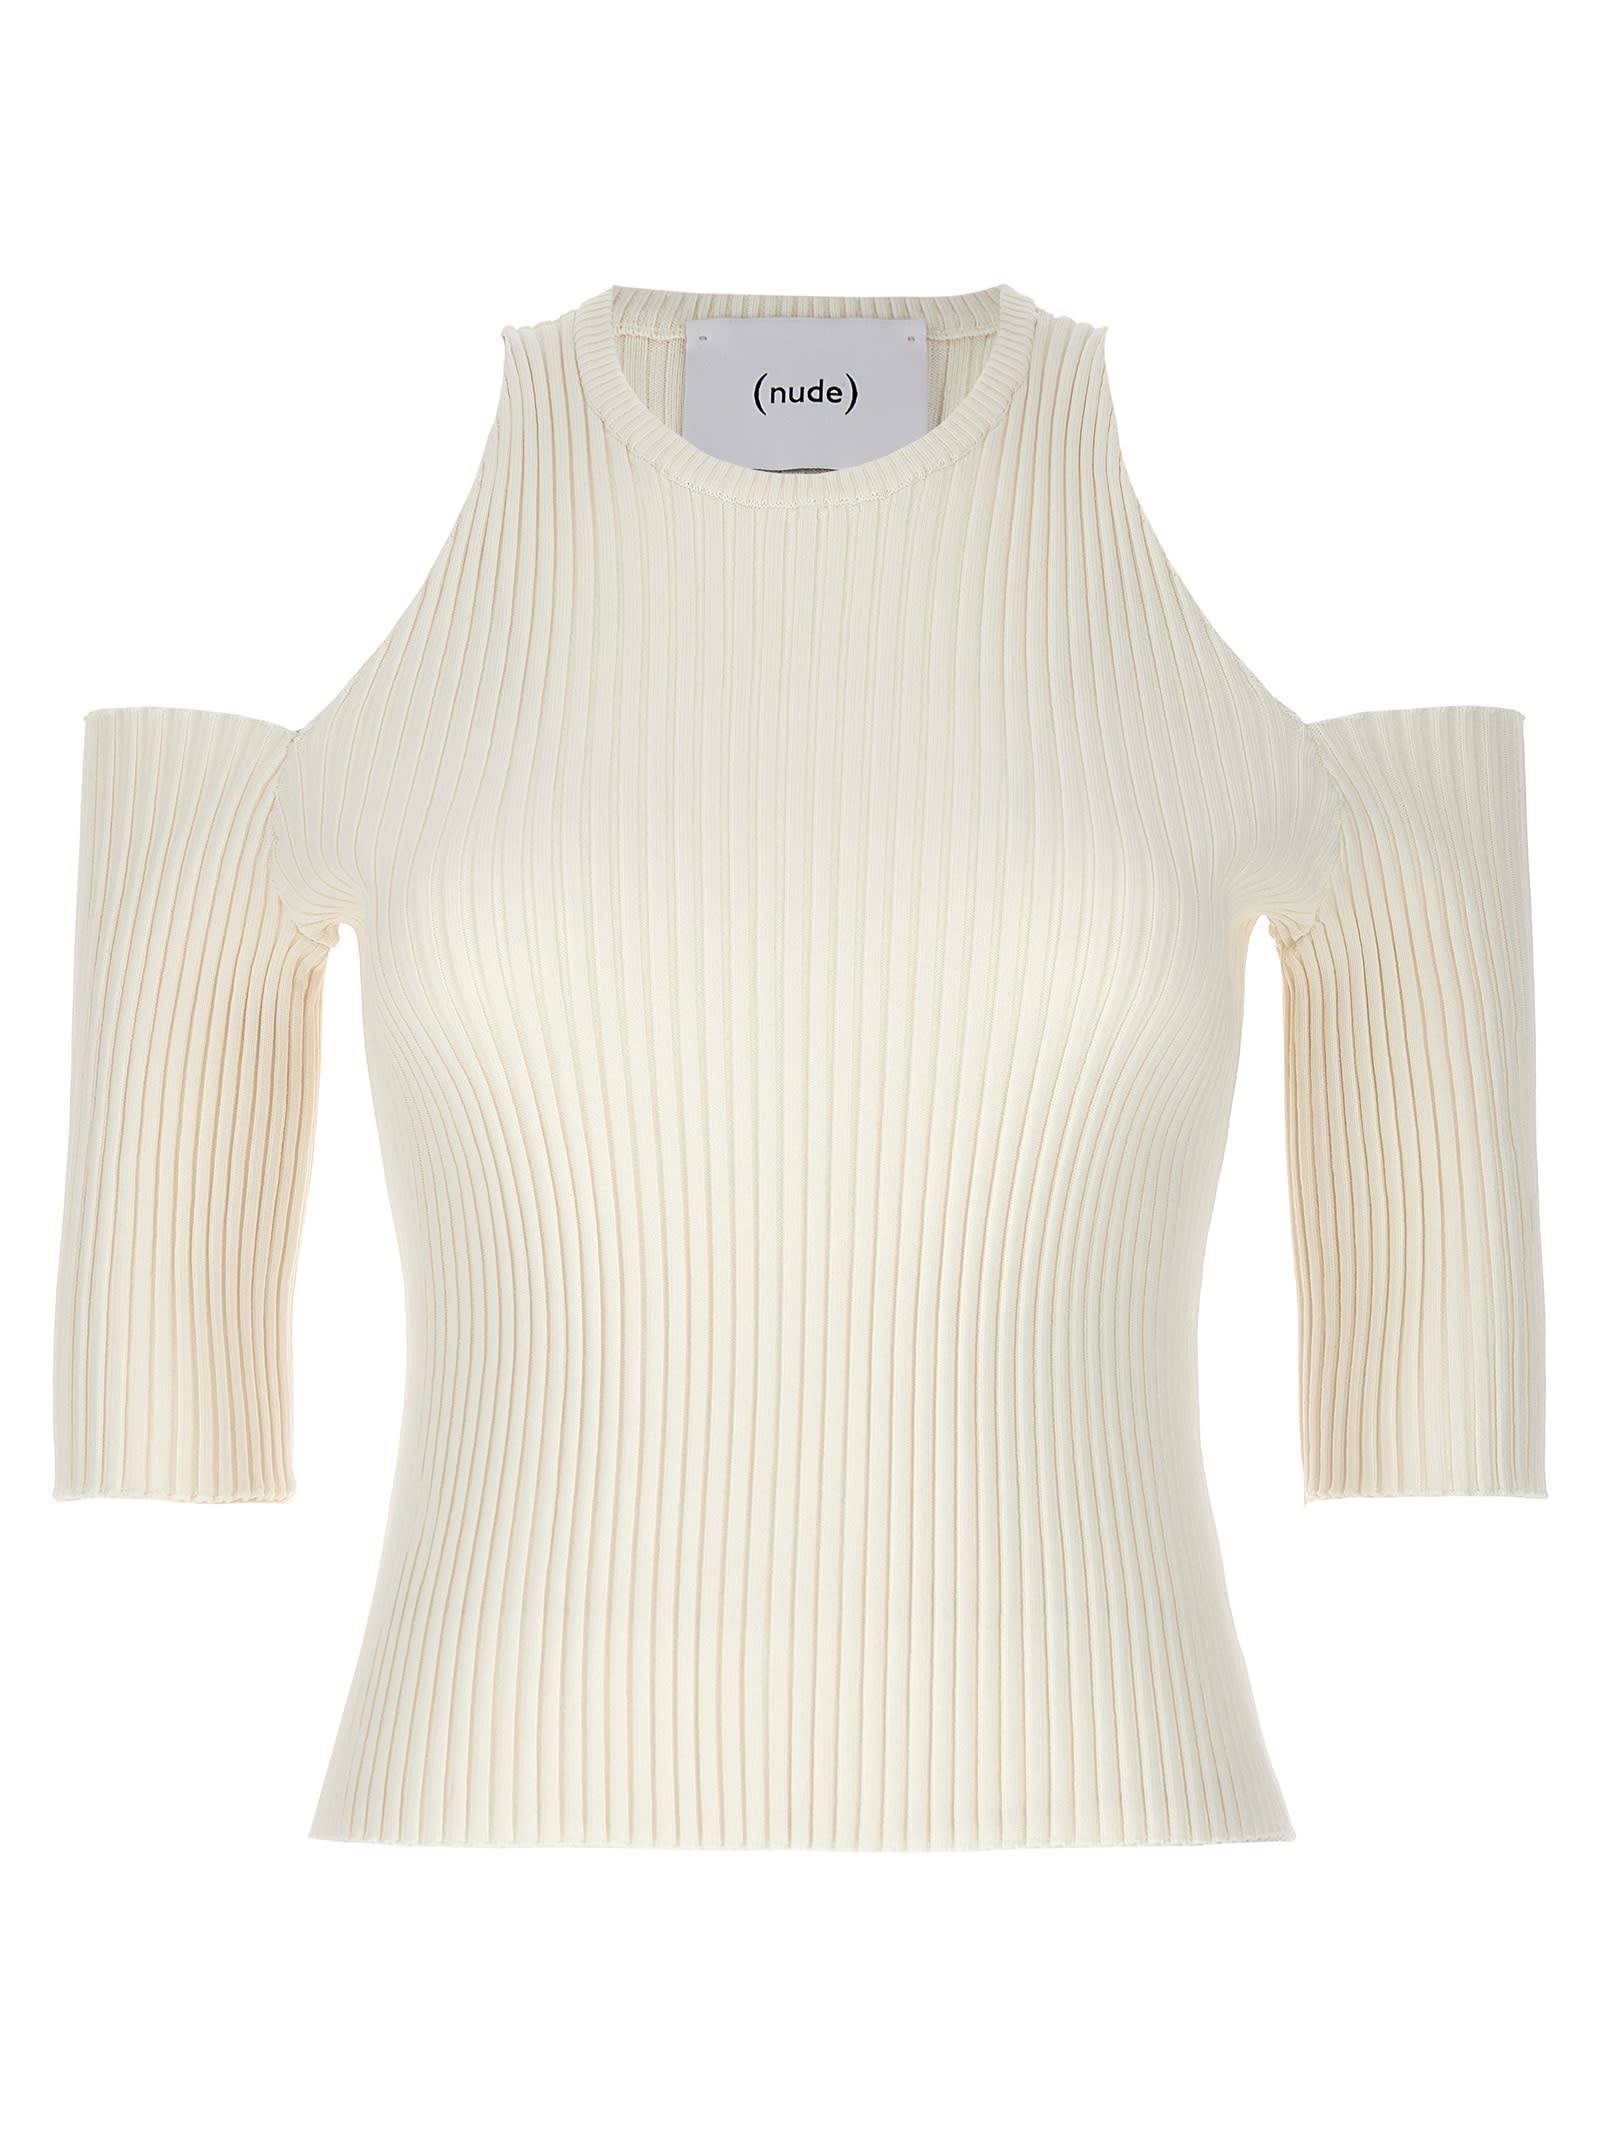 (nude) Cut-out Knit Top